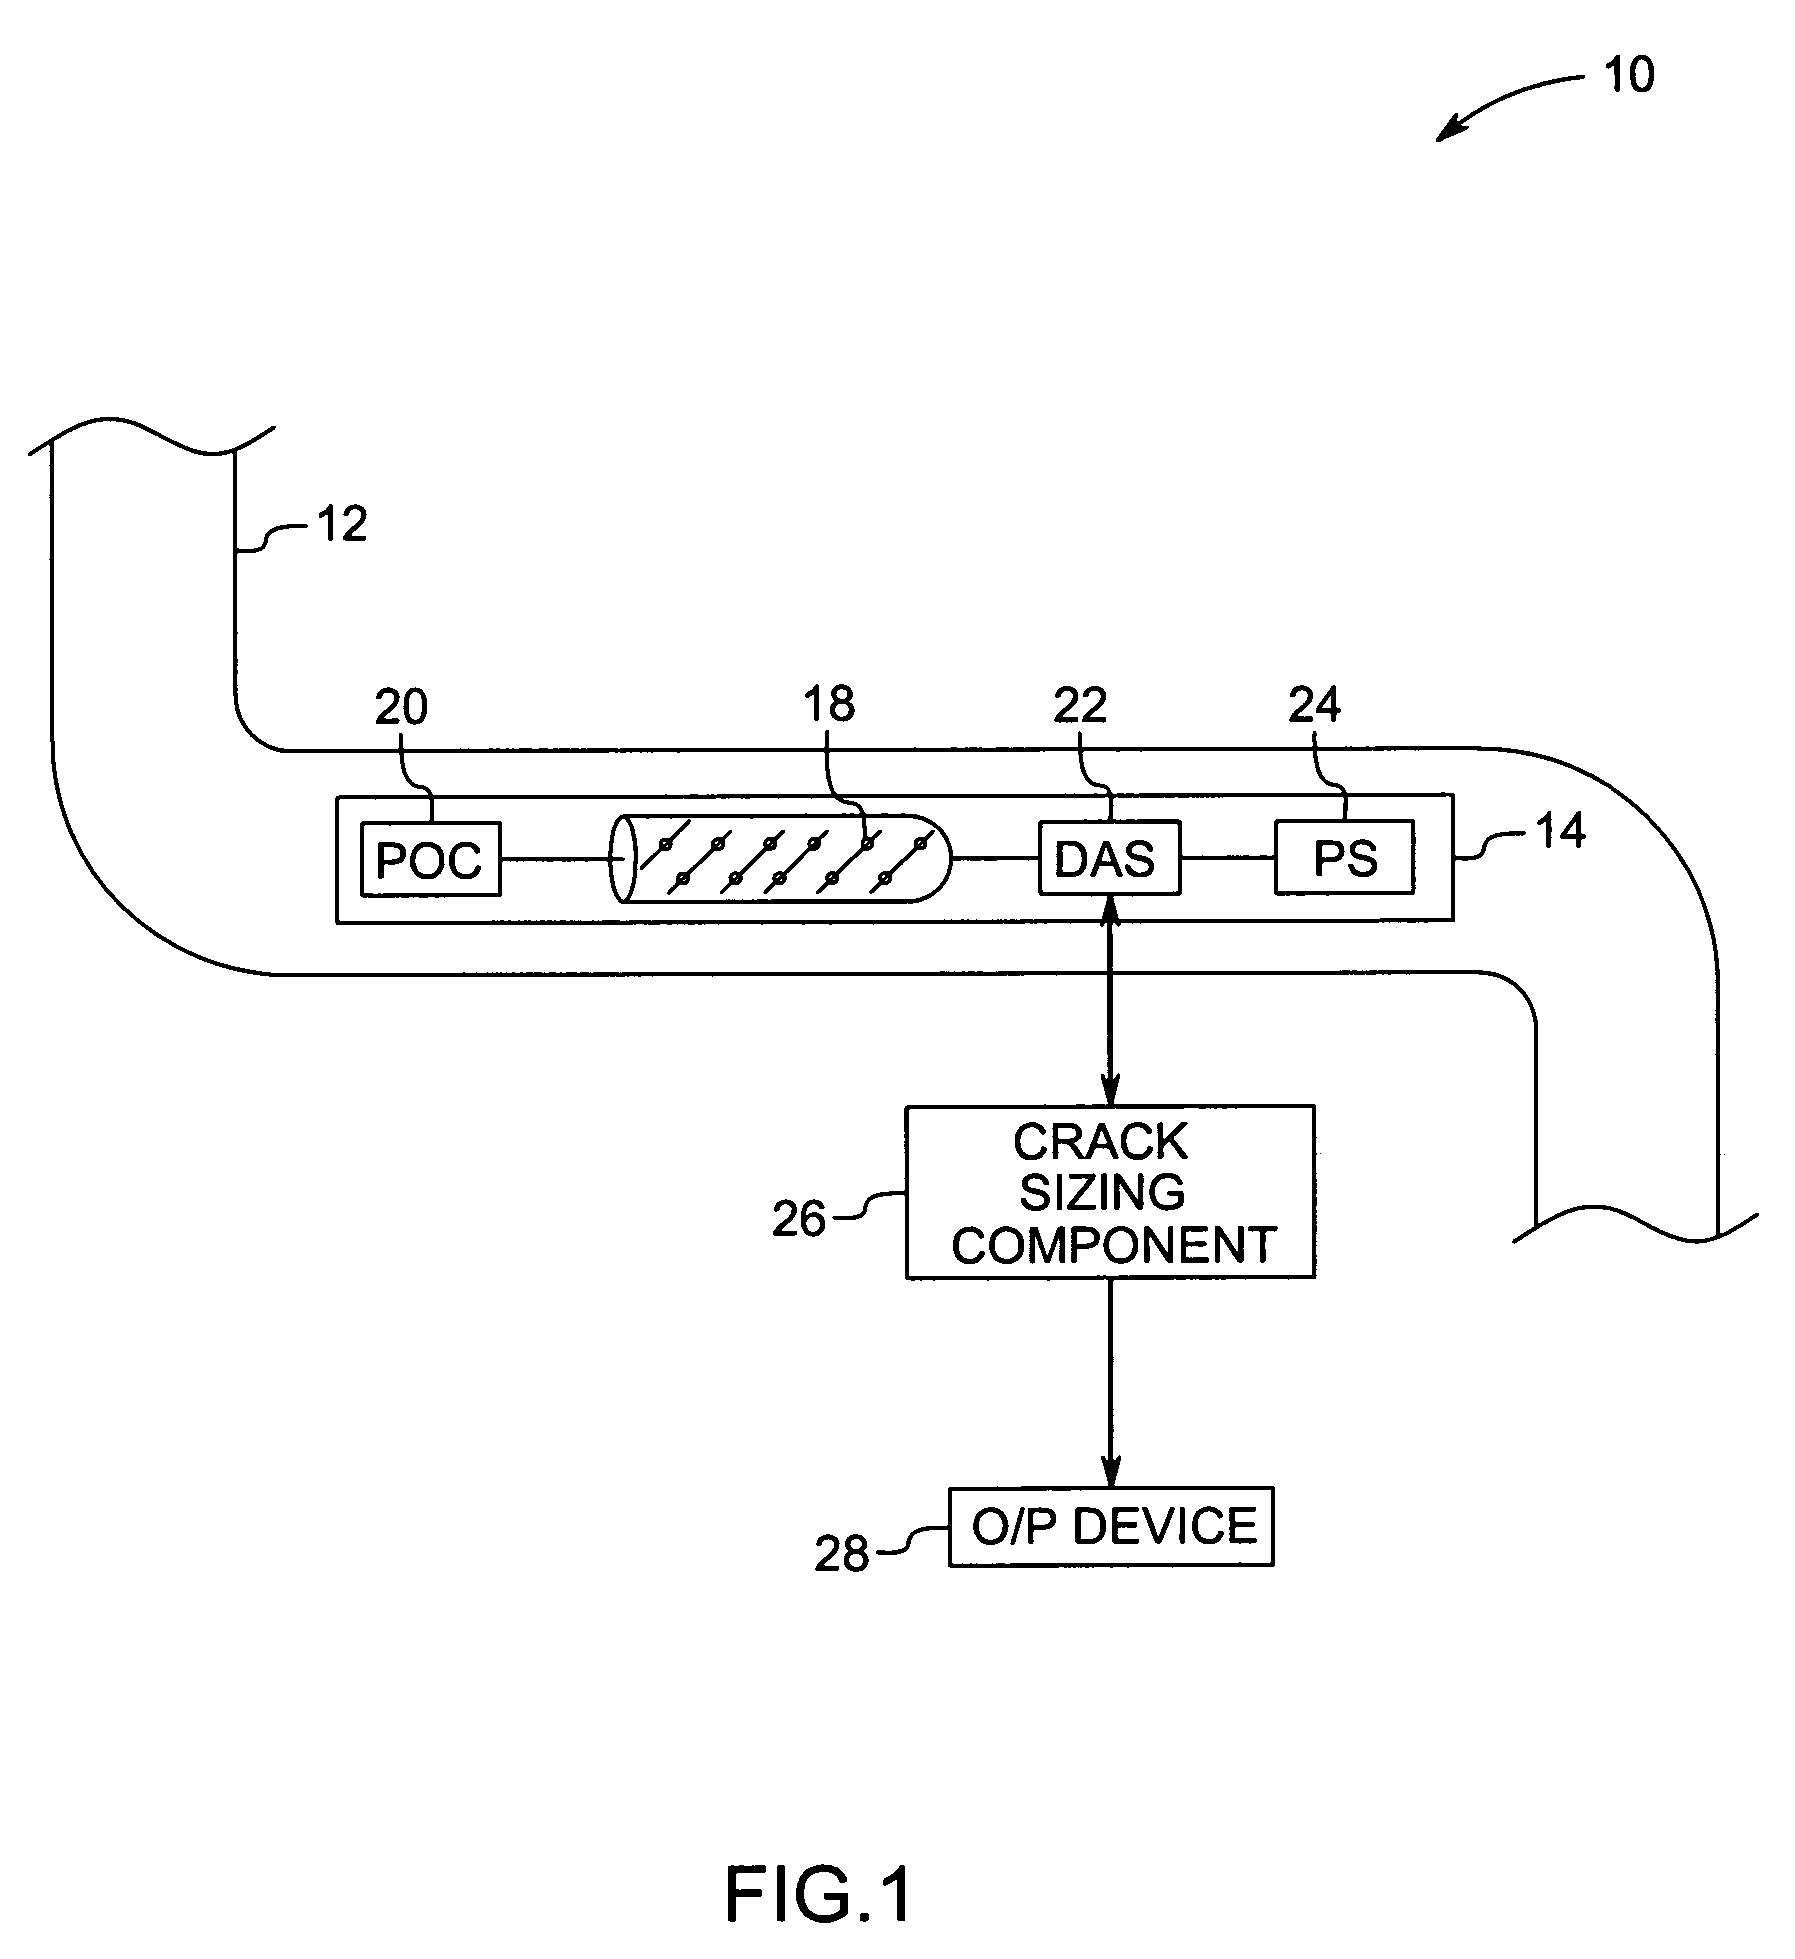 Method and system for inspecting objects using ultrasound scan data